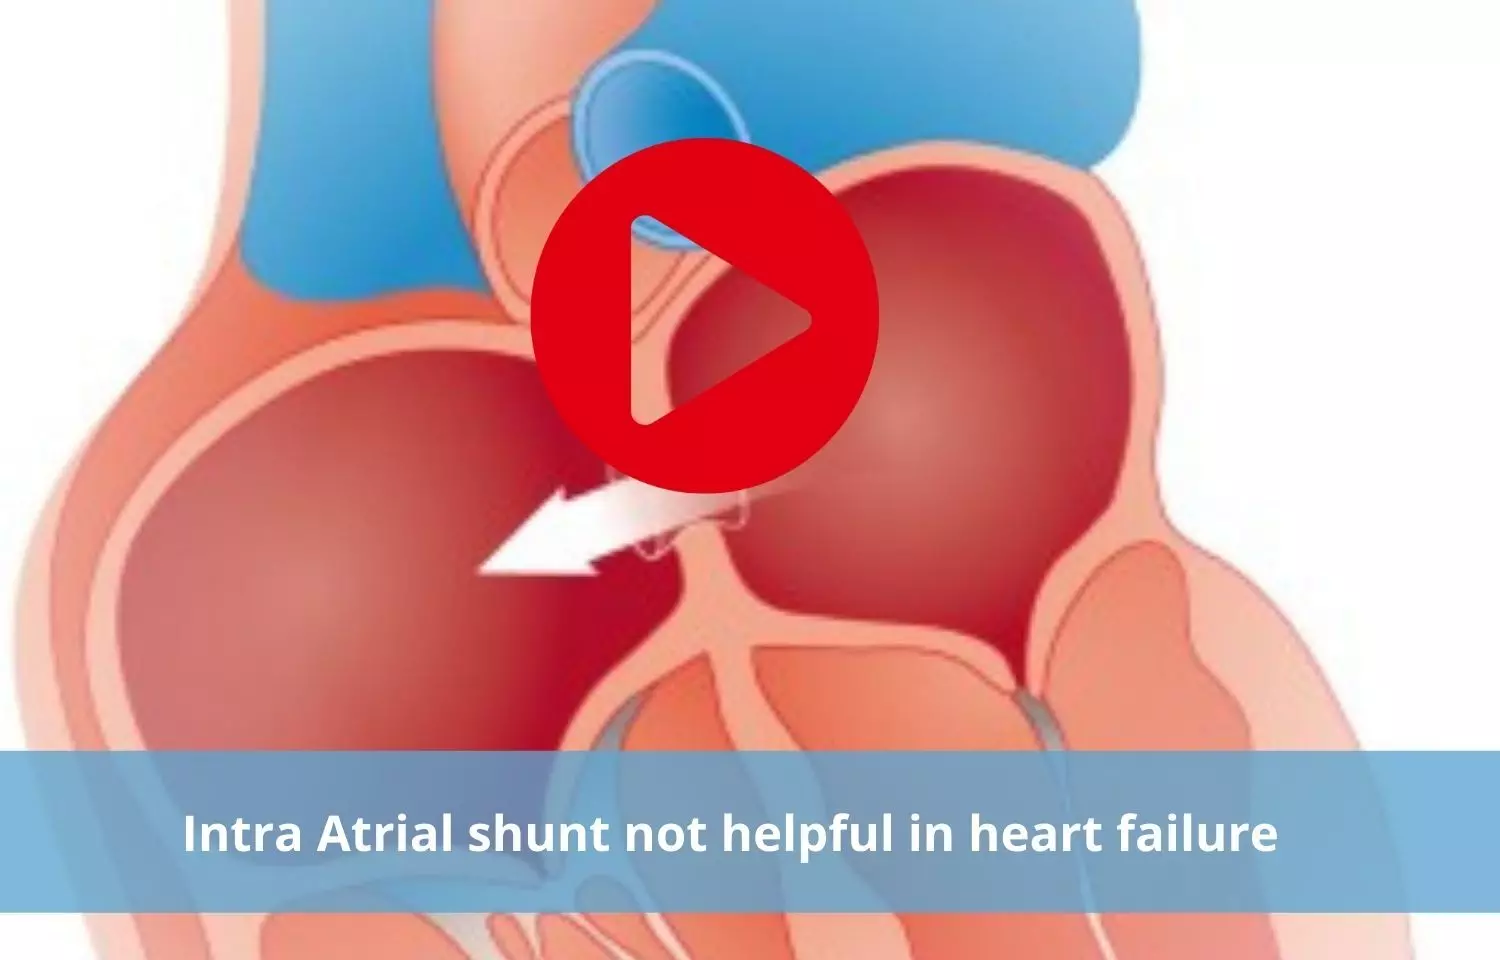 Intra Atrial shunt is inefficient in preventing heart failure